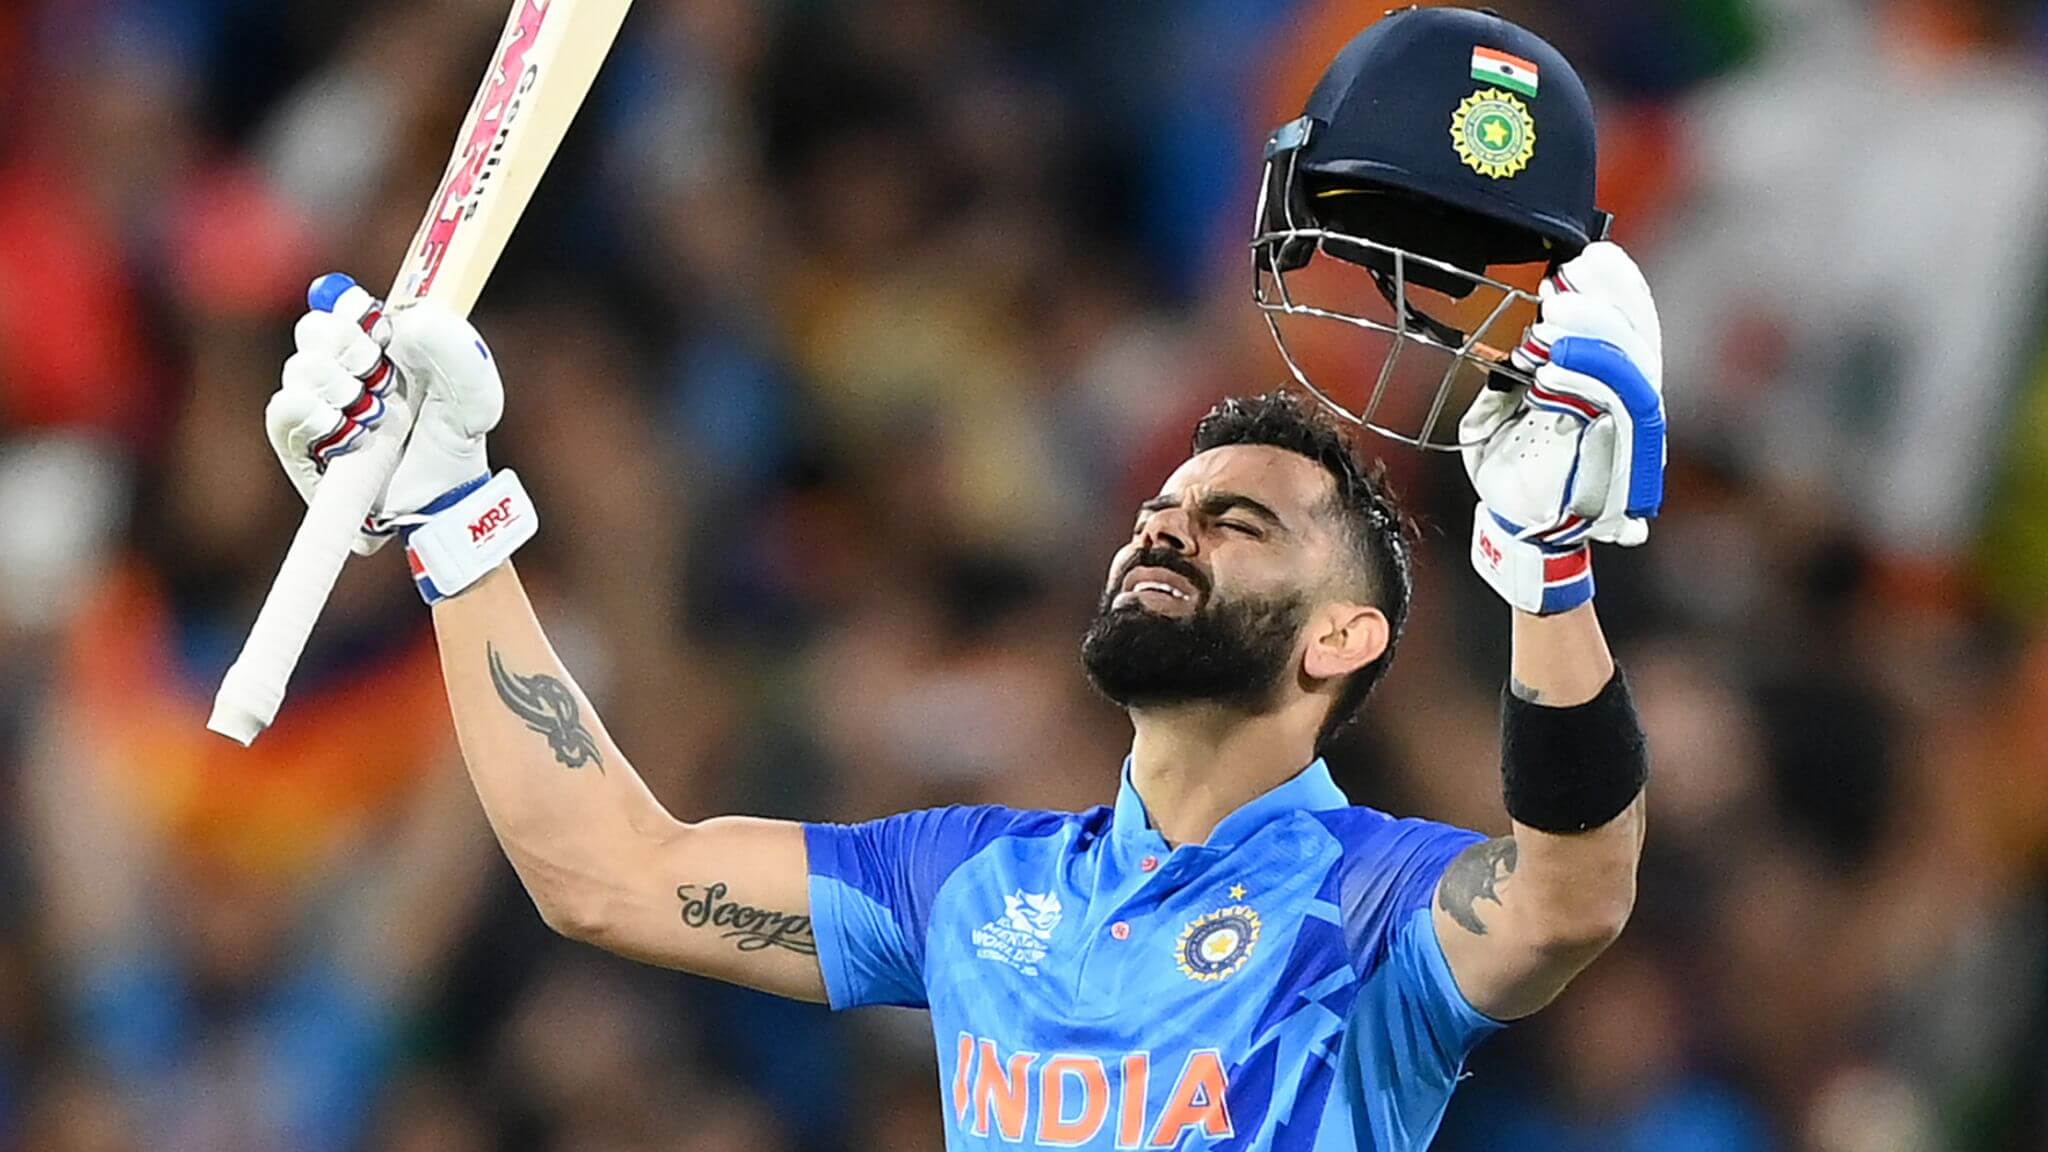 The role of Rahu in Kohli’s fall & comeback in Cricket